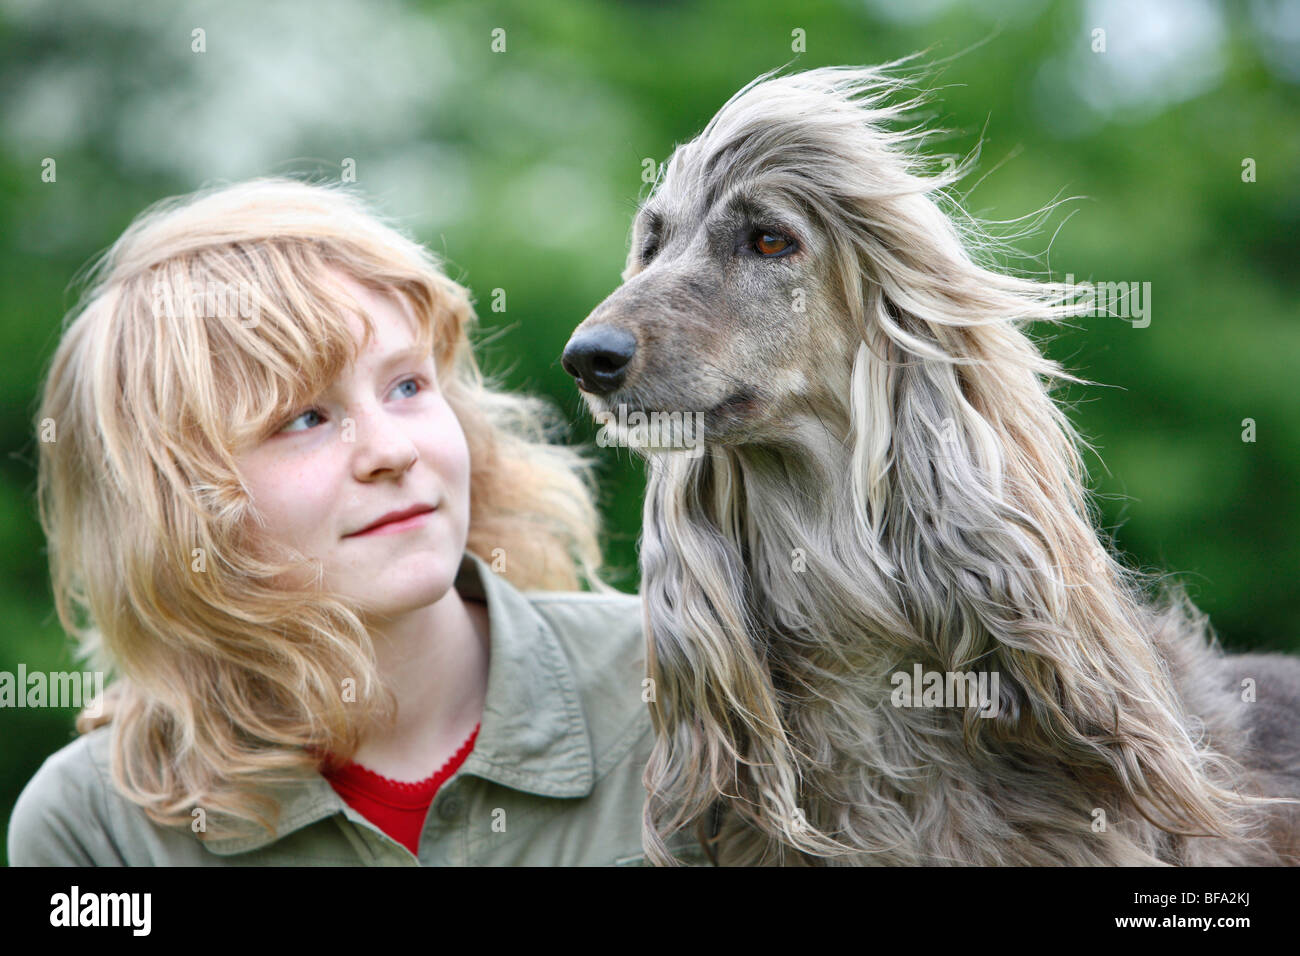 Afghanistan Hound, Afghan Hound (Canis lupus f. familiaris), girl with his dog, their long hair blowing in the wind Stock Photo